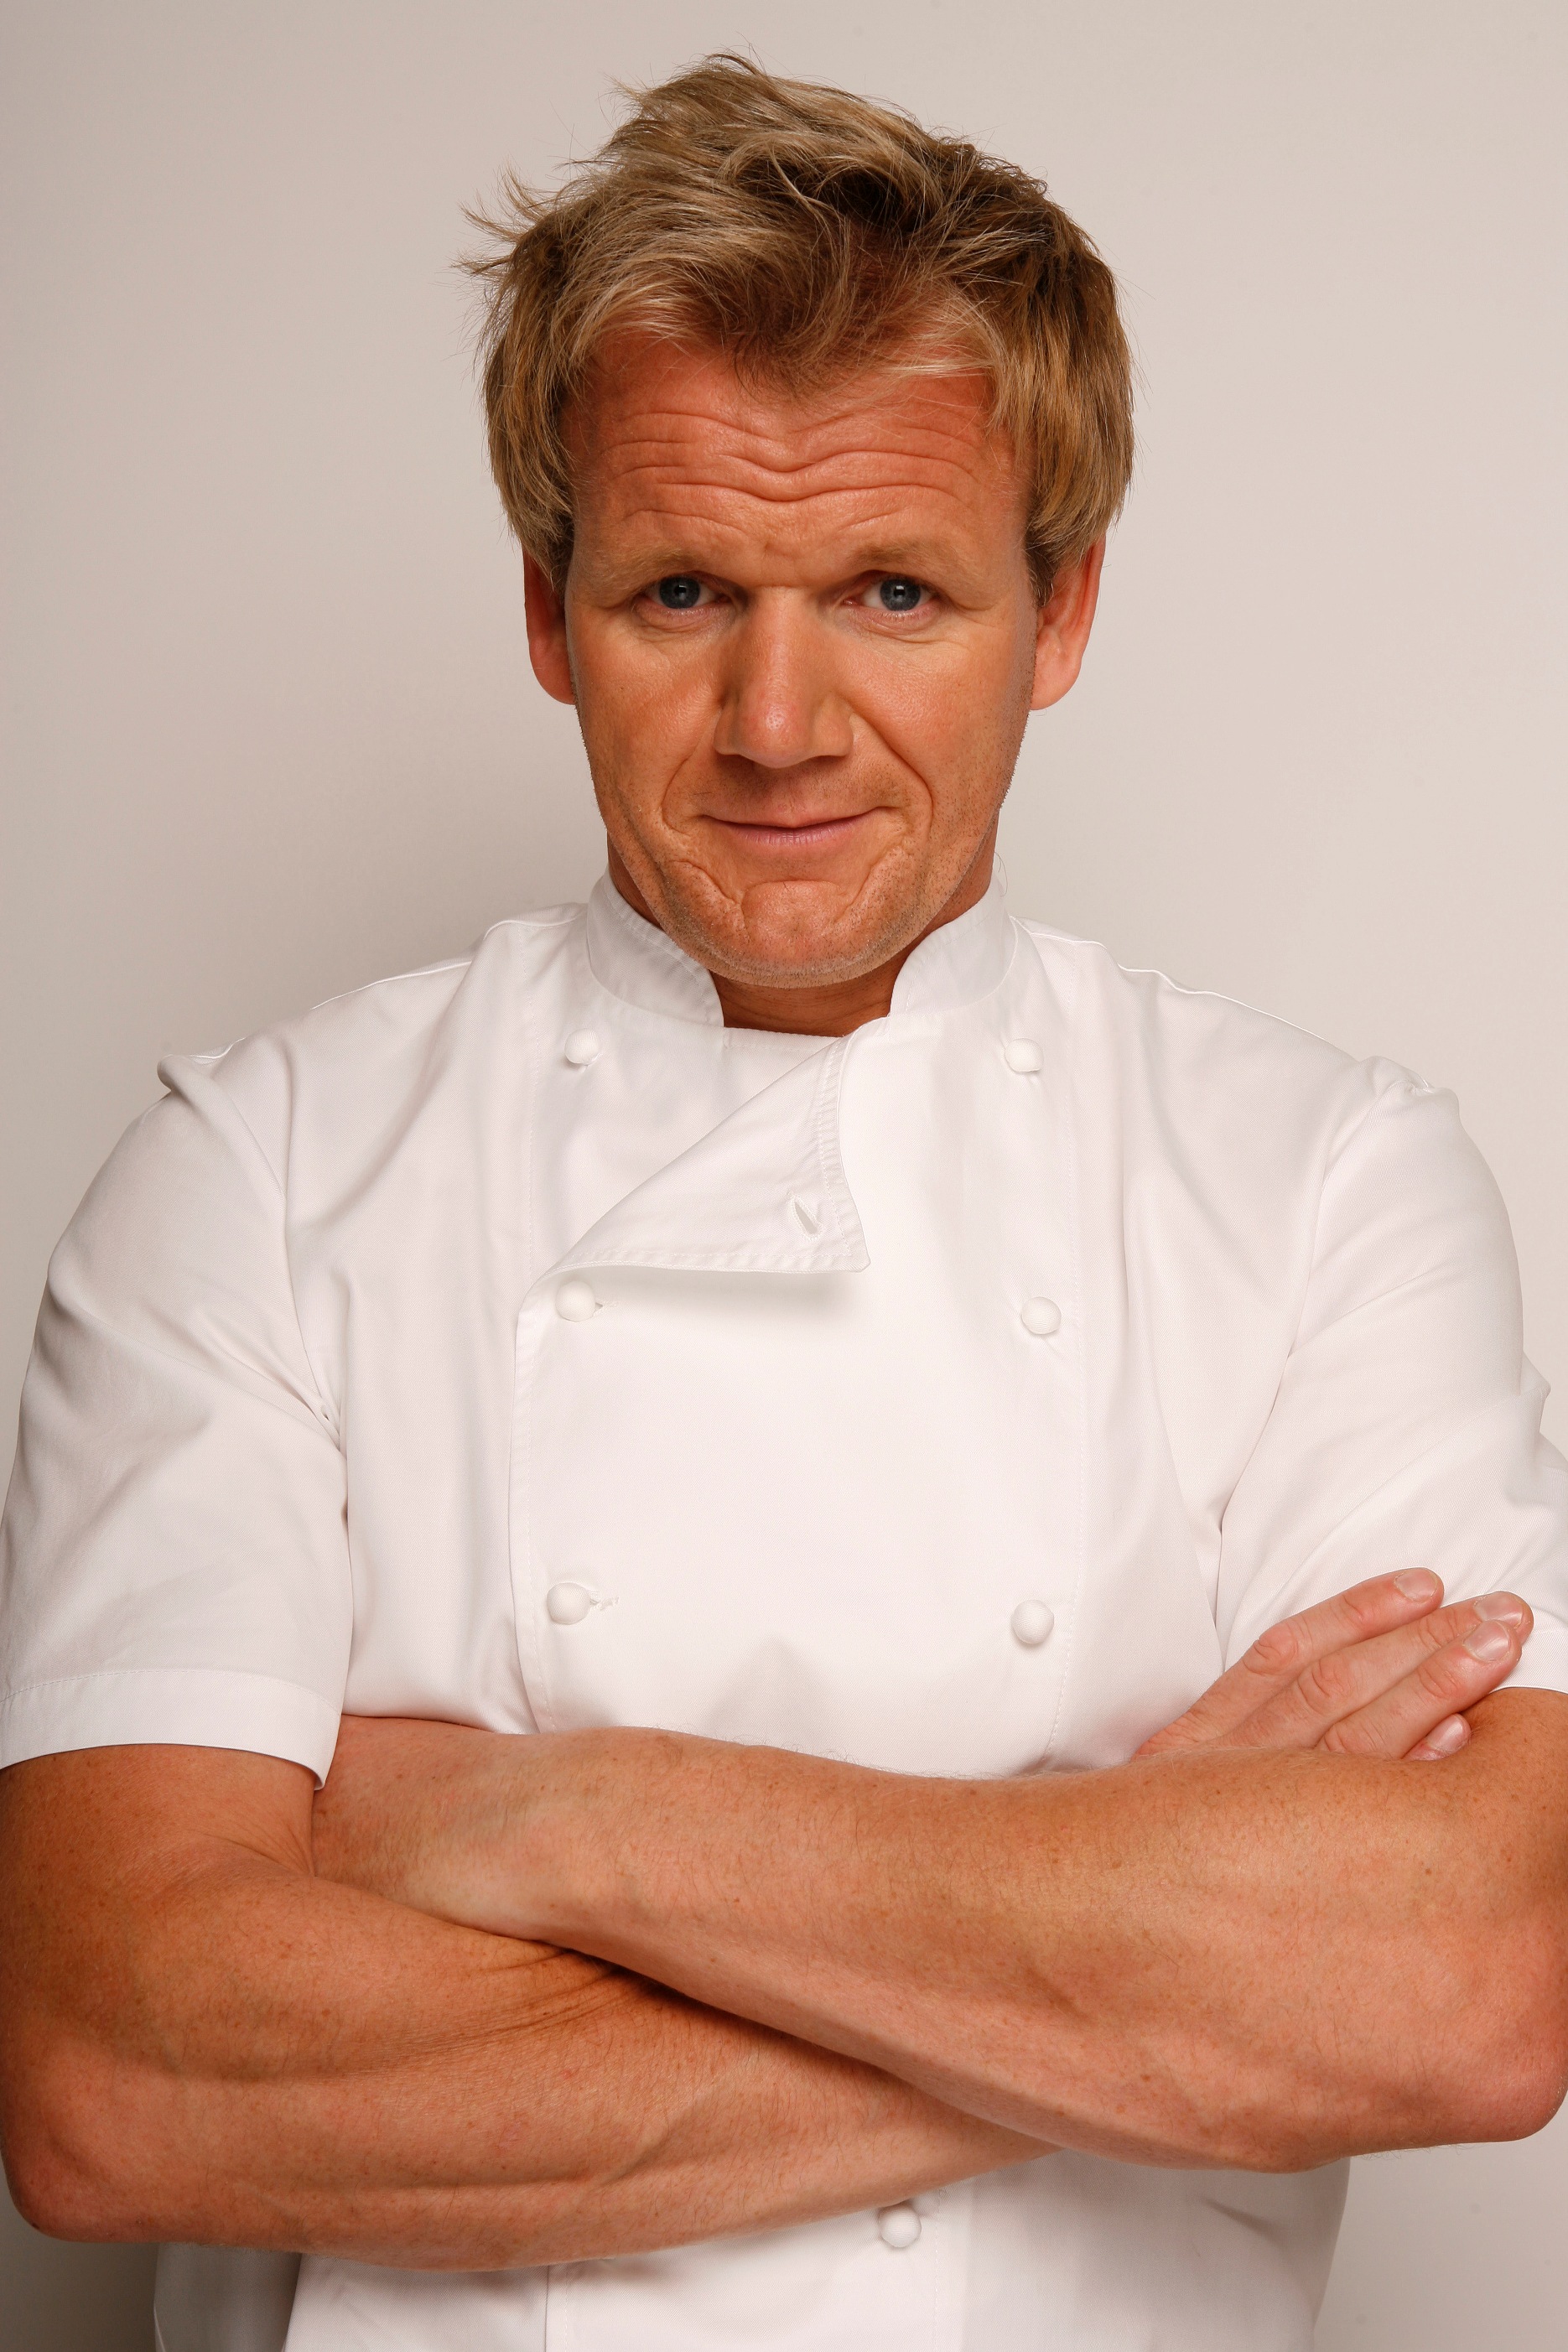 Gordon Ramsay Wallpapers by Taylor Savage on FL.